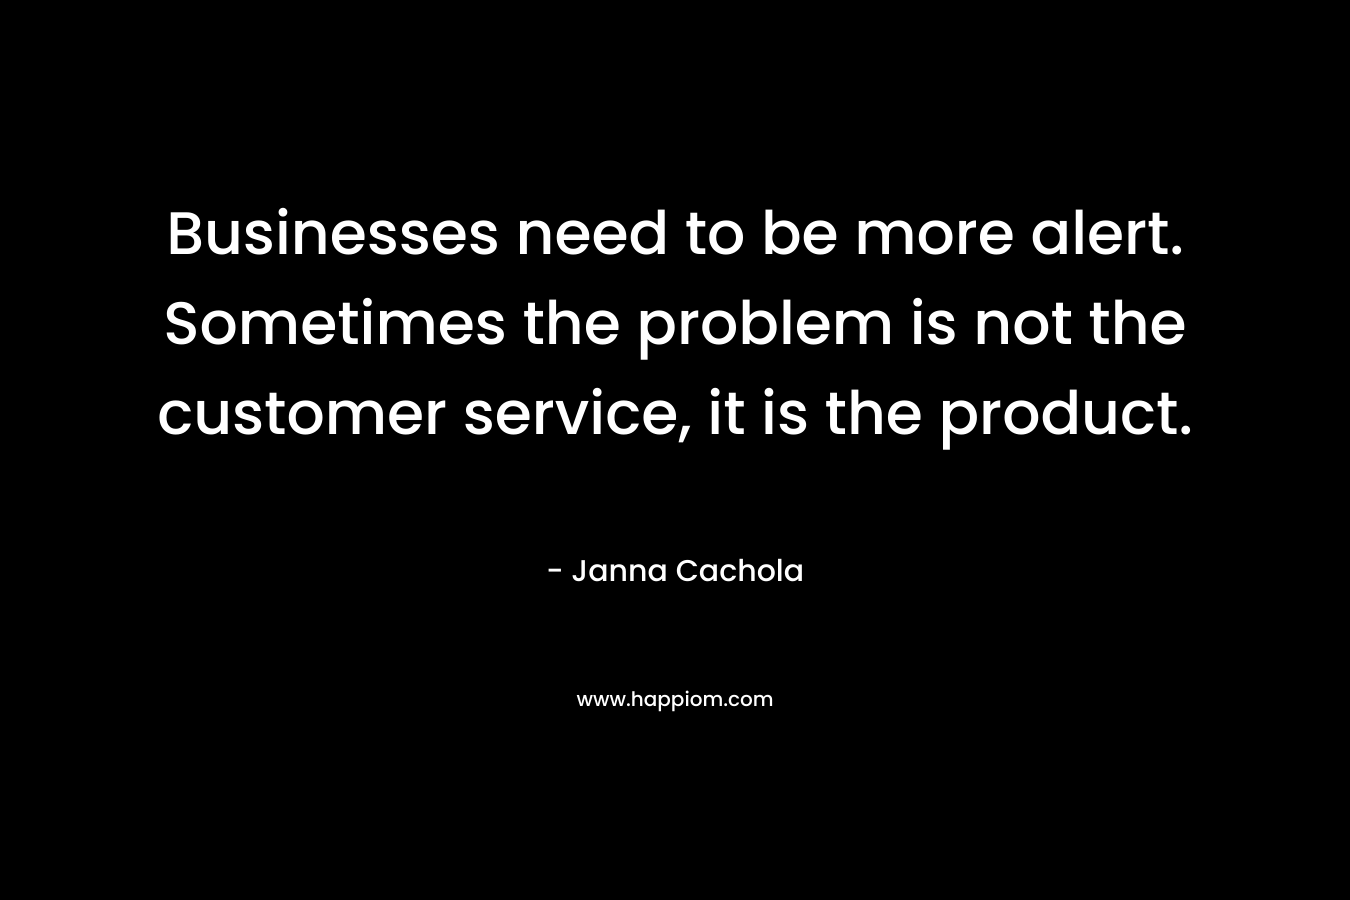 Businesses need to be more alert. Sometimes the problem is not the customer service, it is the product. – Janna Cachola